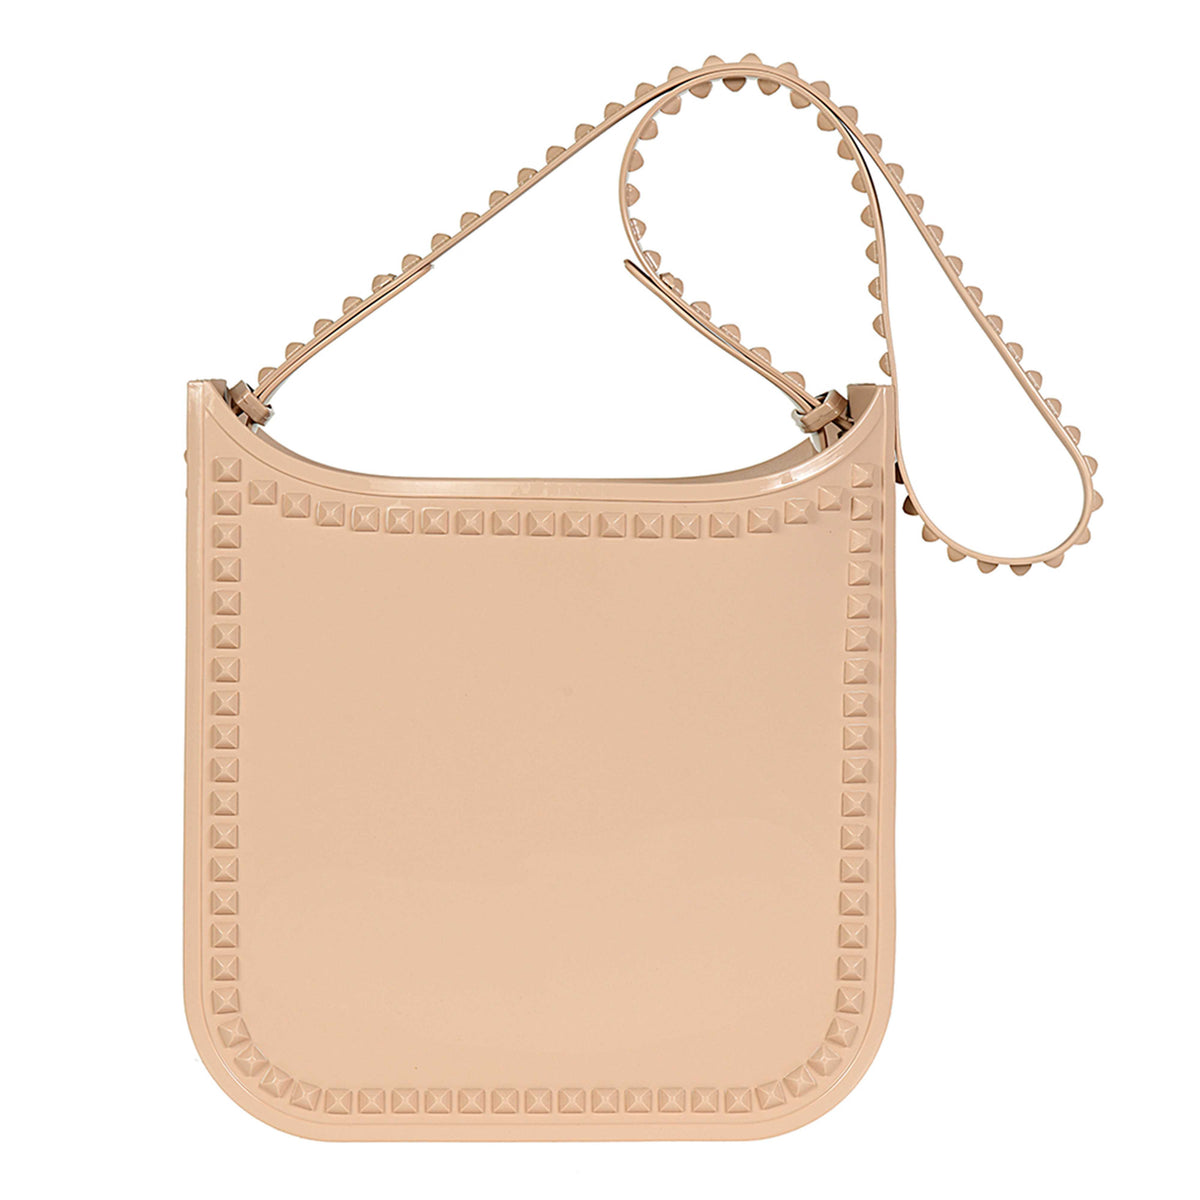 jelly handbag in blush from Carmen Sol with studs